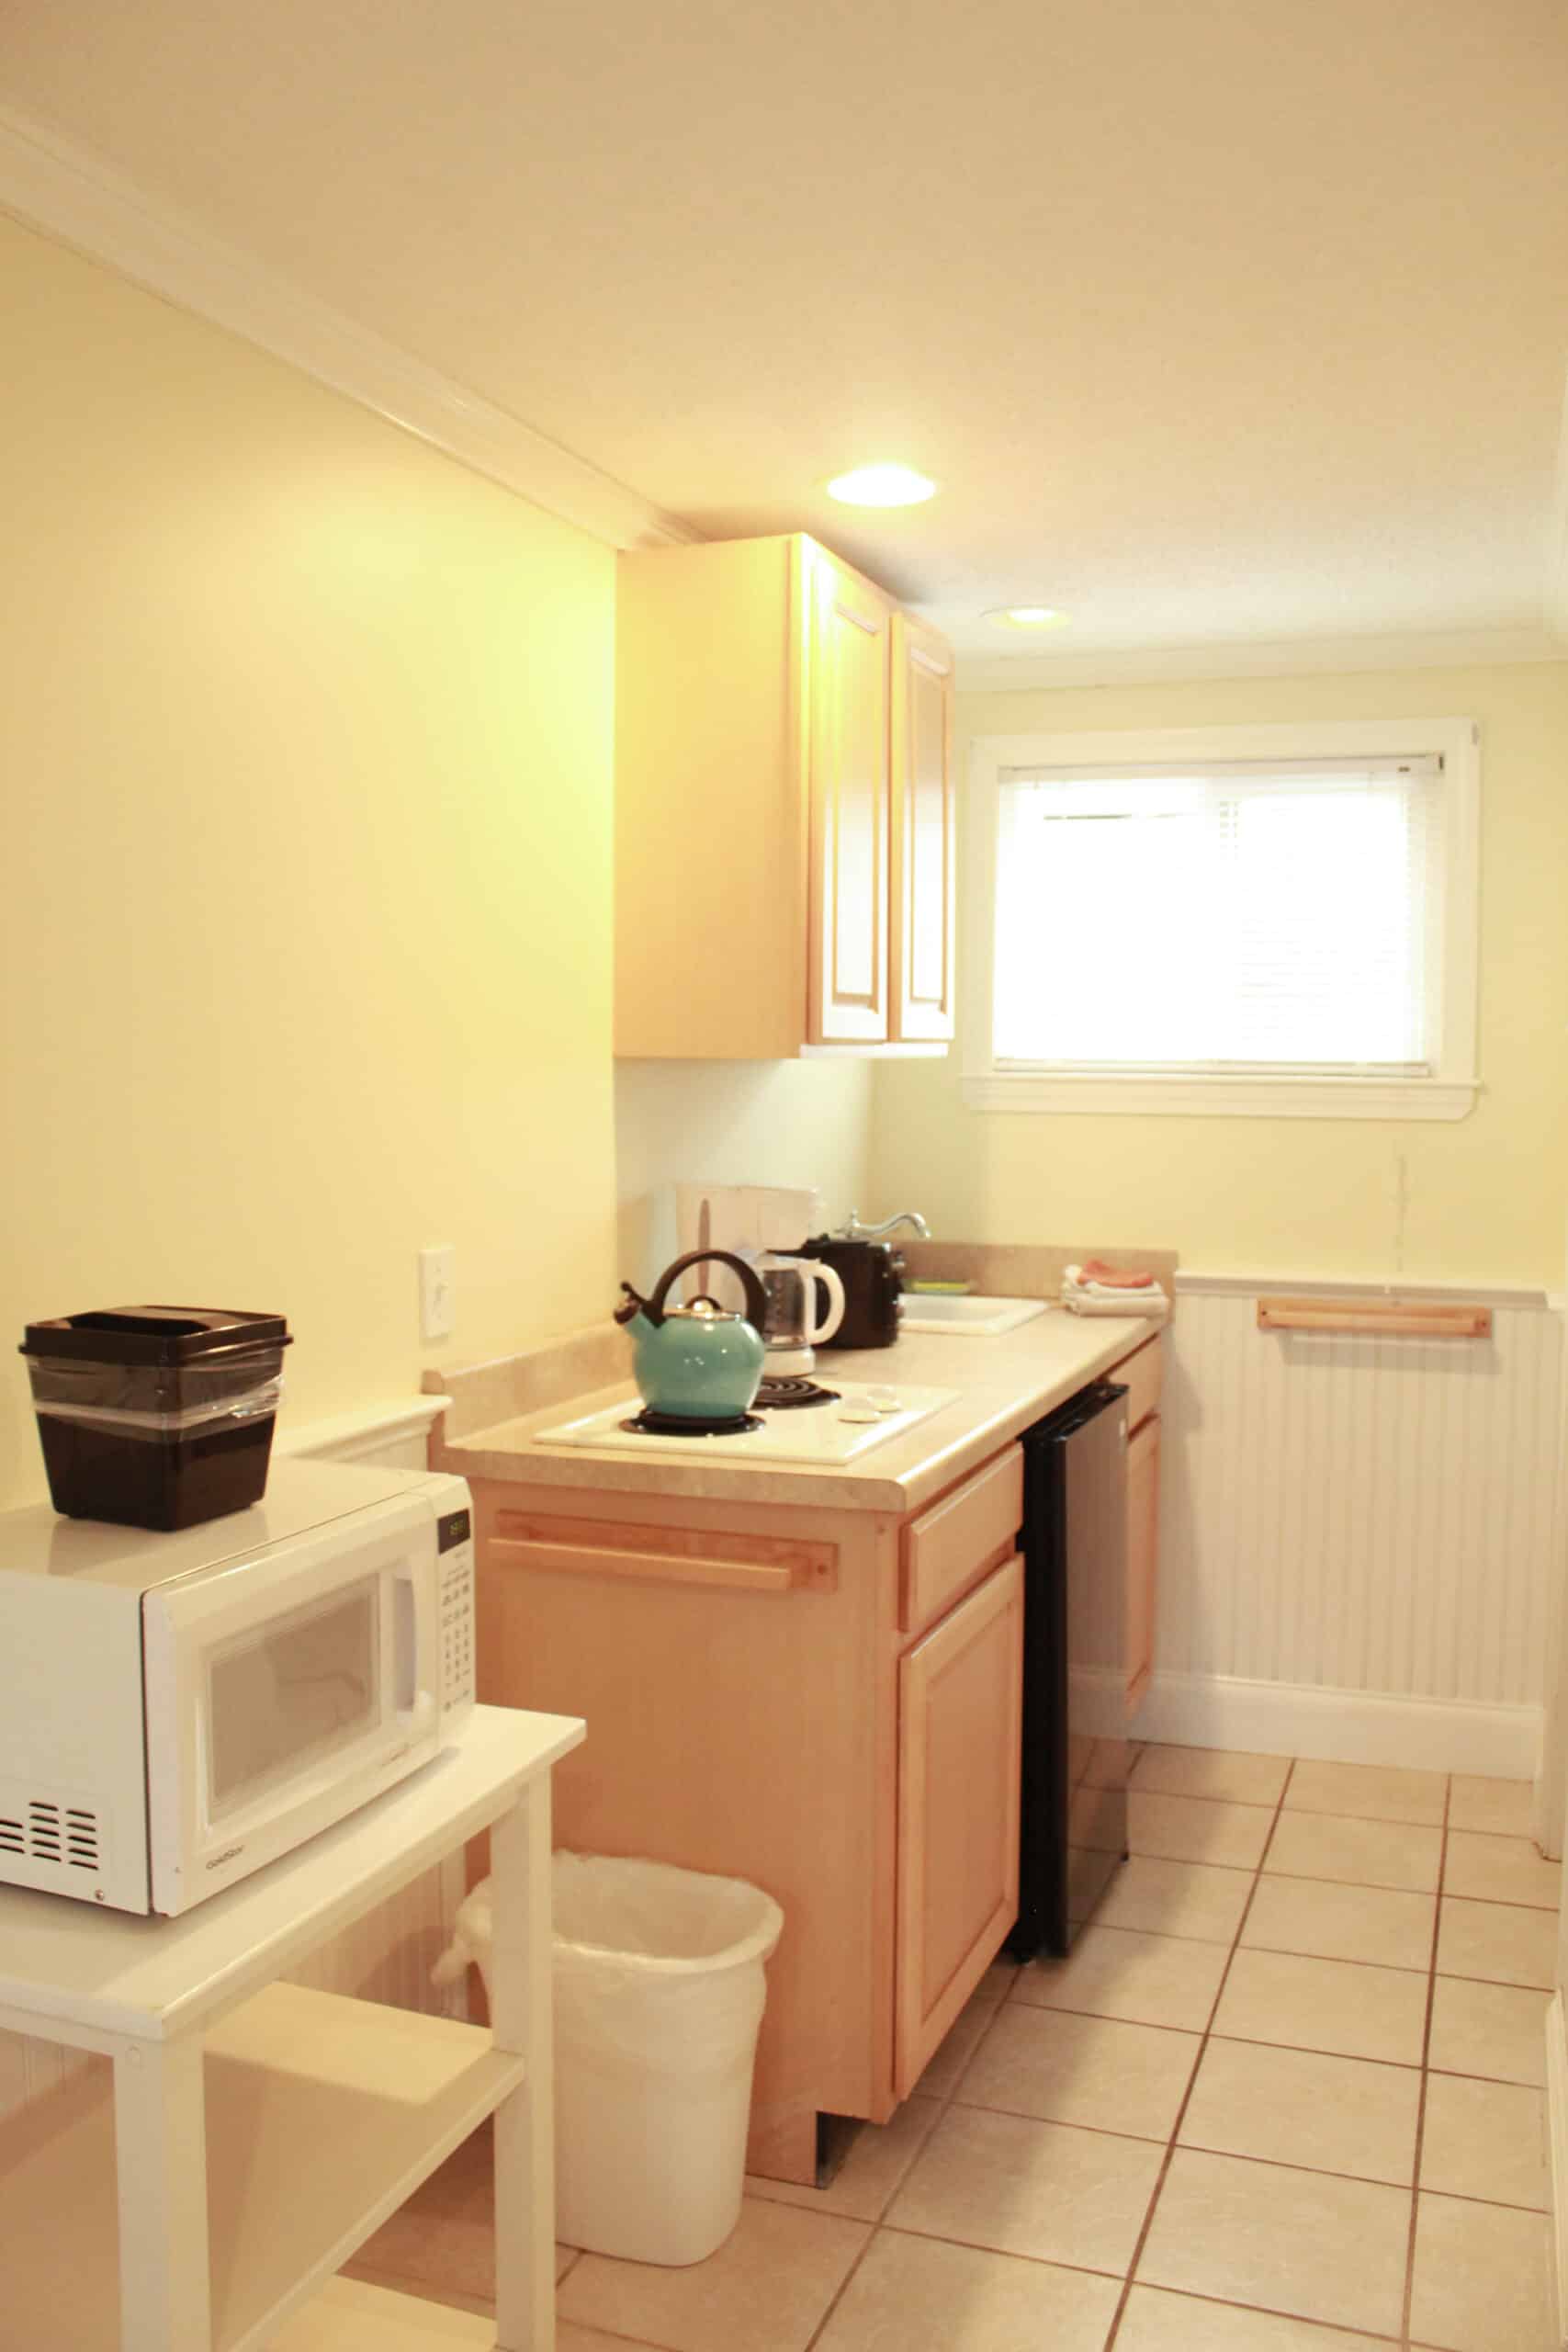 Spacious Room with Kitchenette, Room #1